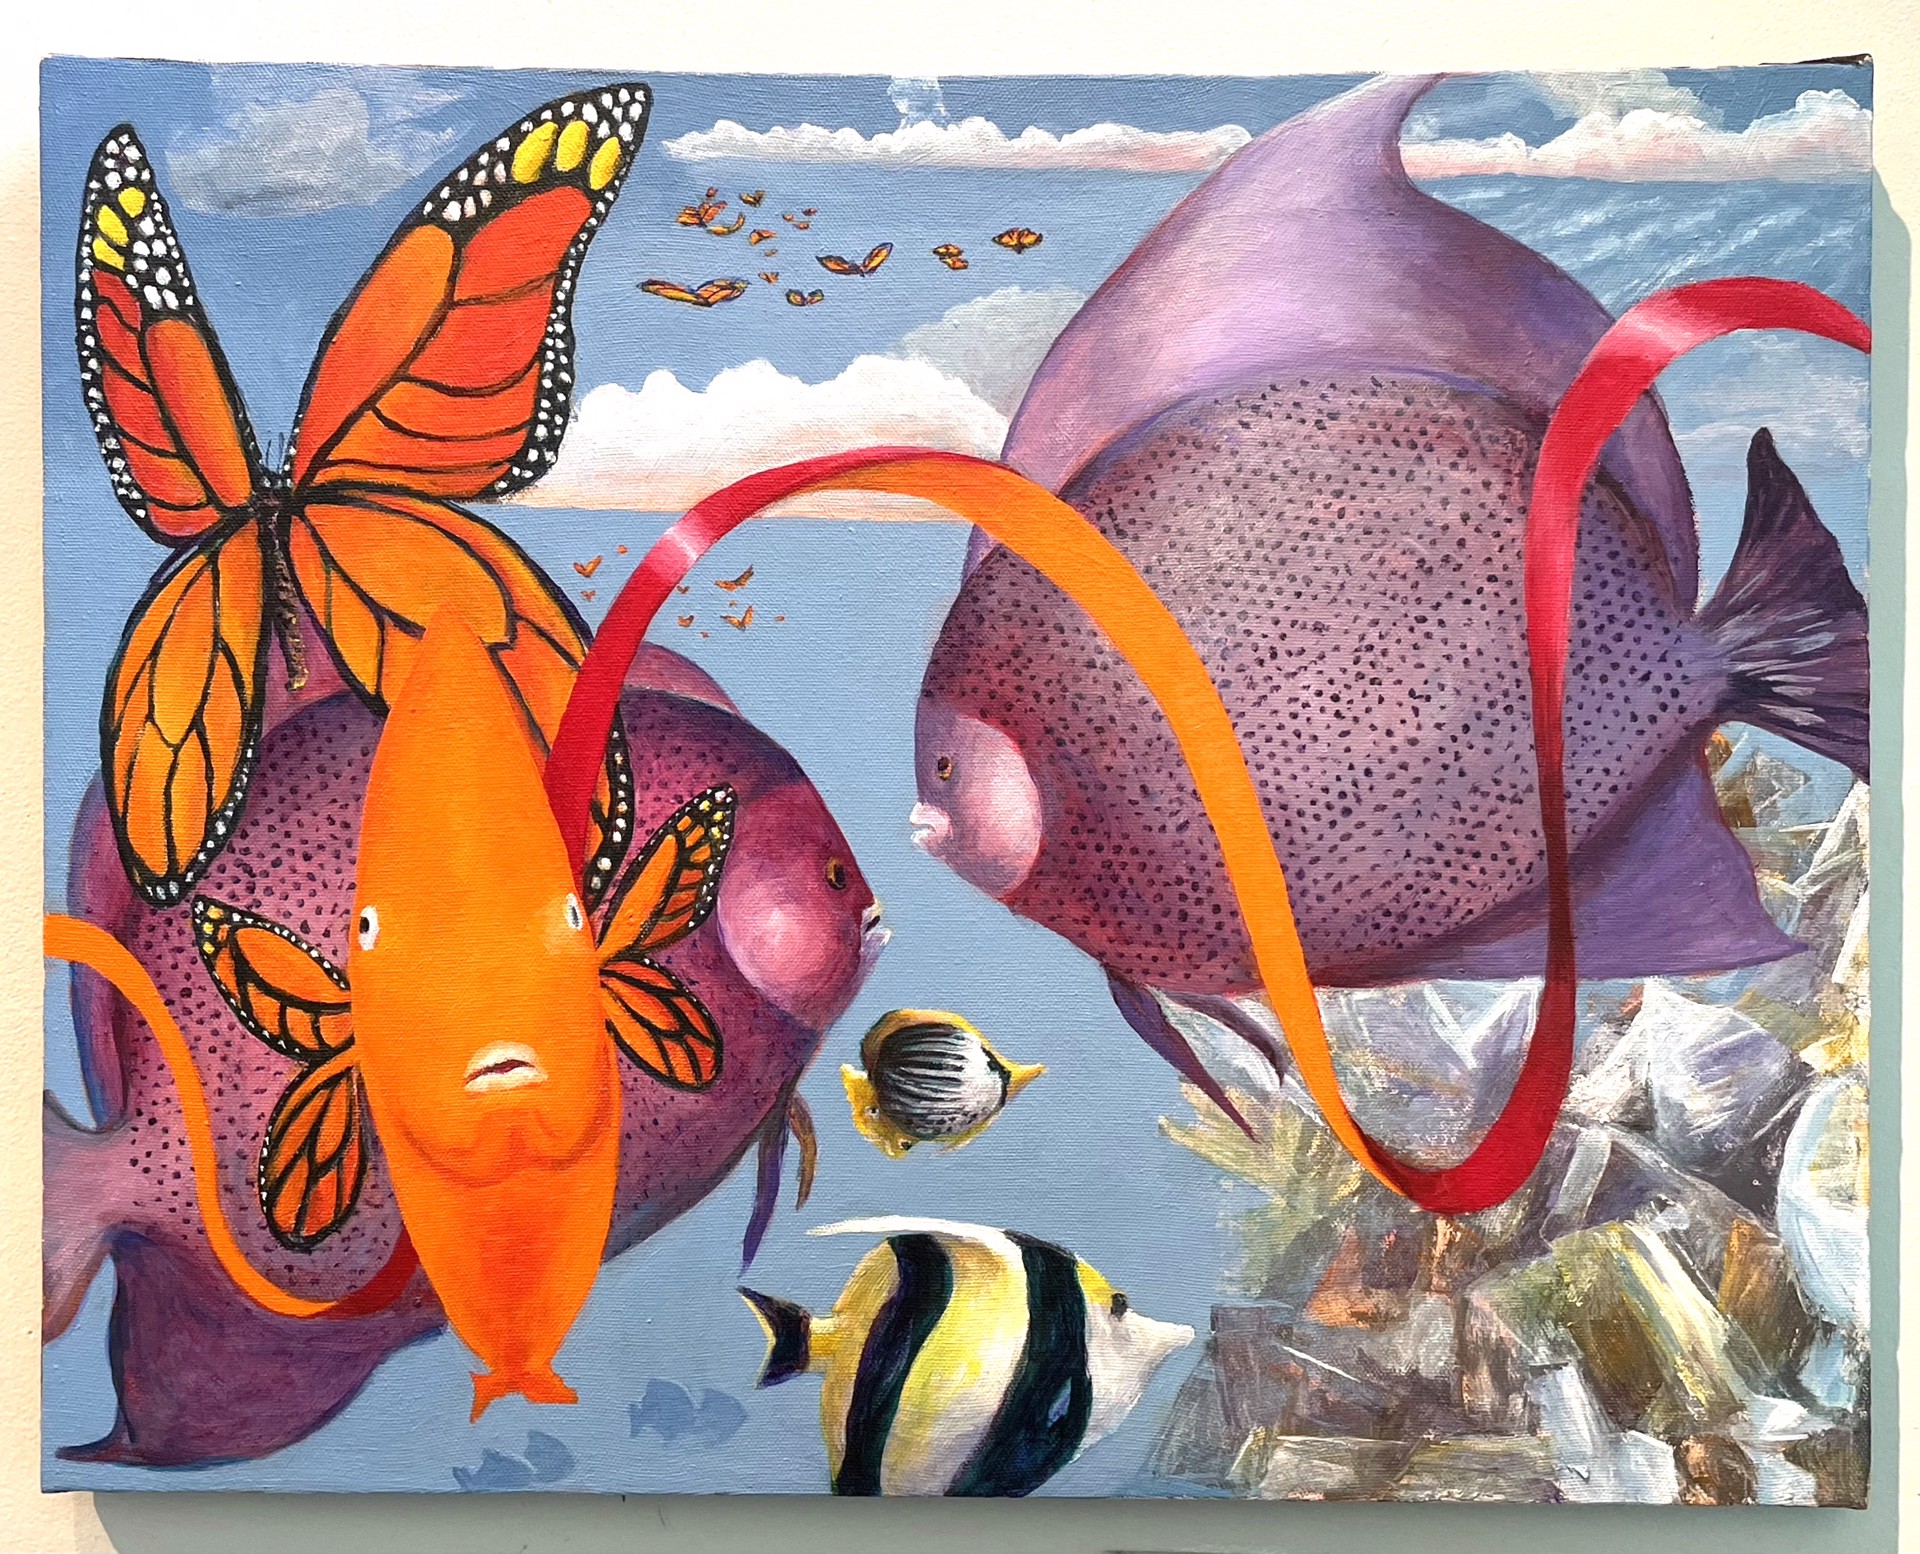 FUNNY FISH by Melanie Hickerson